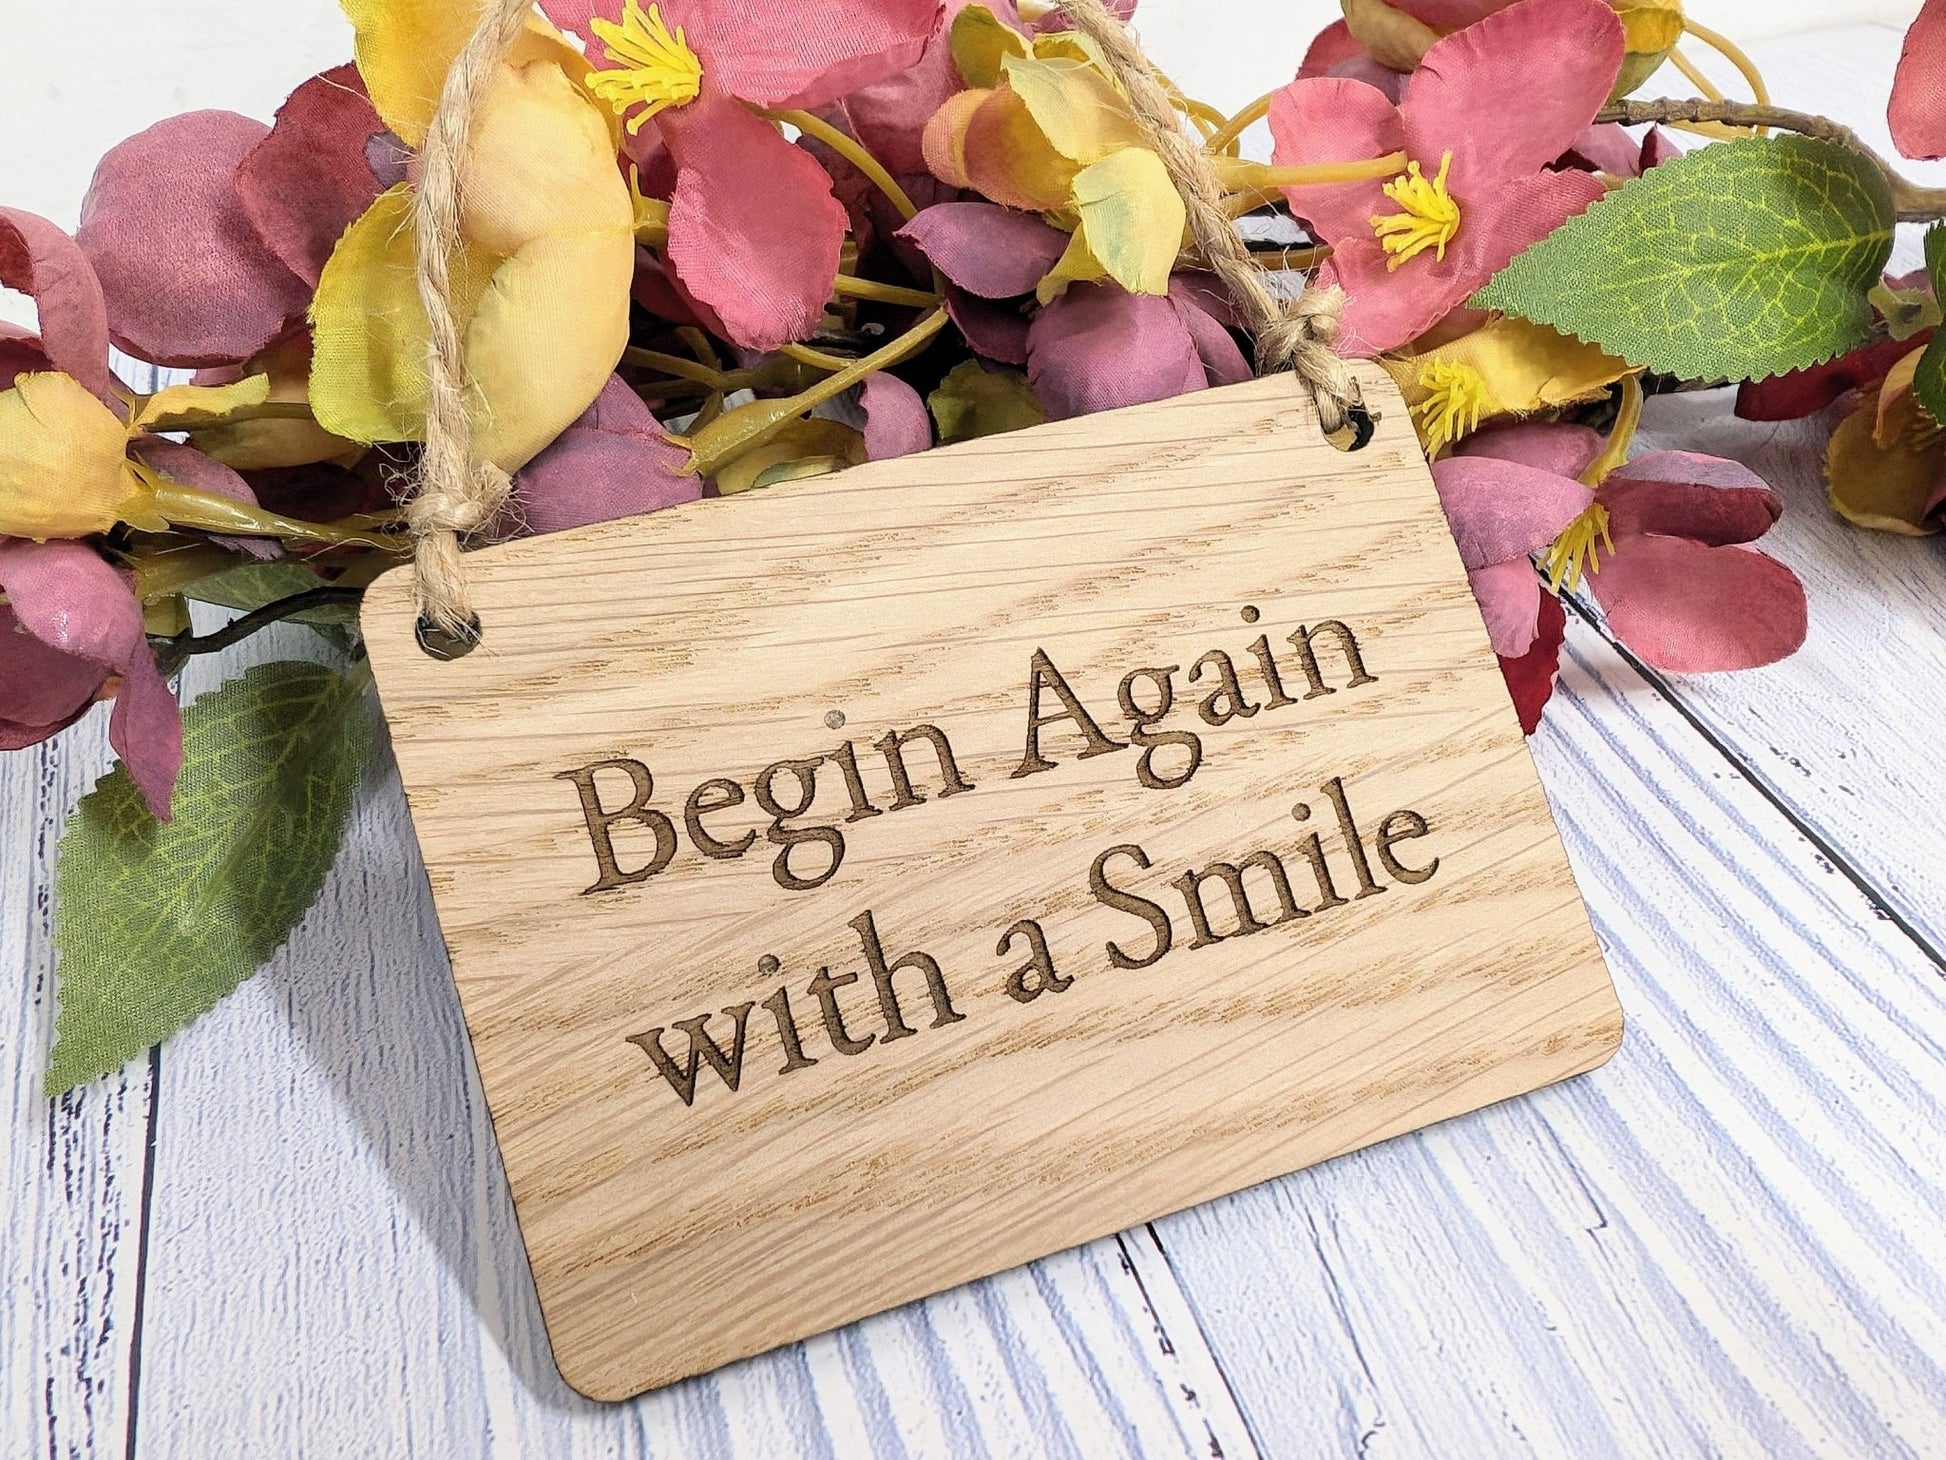 Begin Again with a Smile" - Uplifting Oak Sign, Handmade in Wales, Eco-Friendly, Available in 4 Sizes - CherryGroveCraft